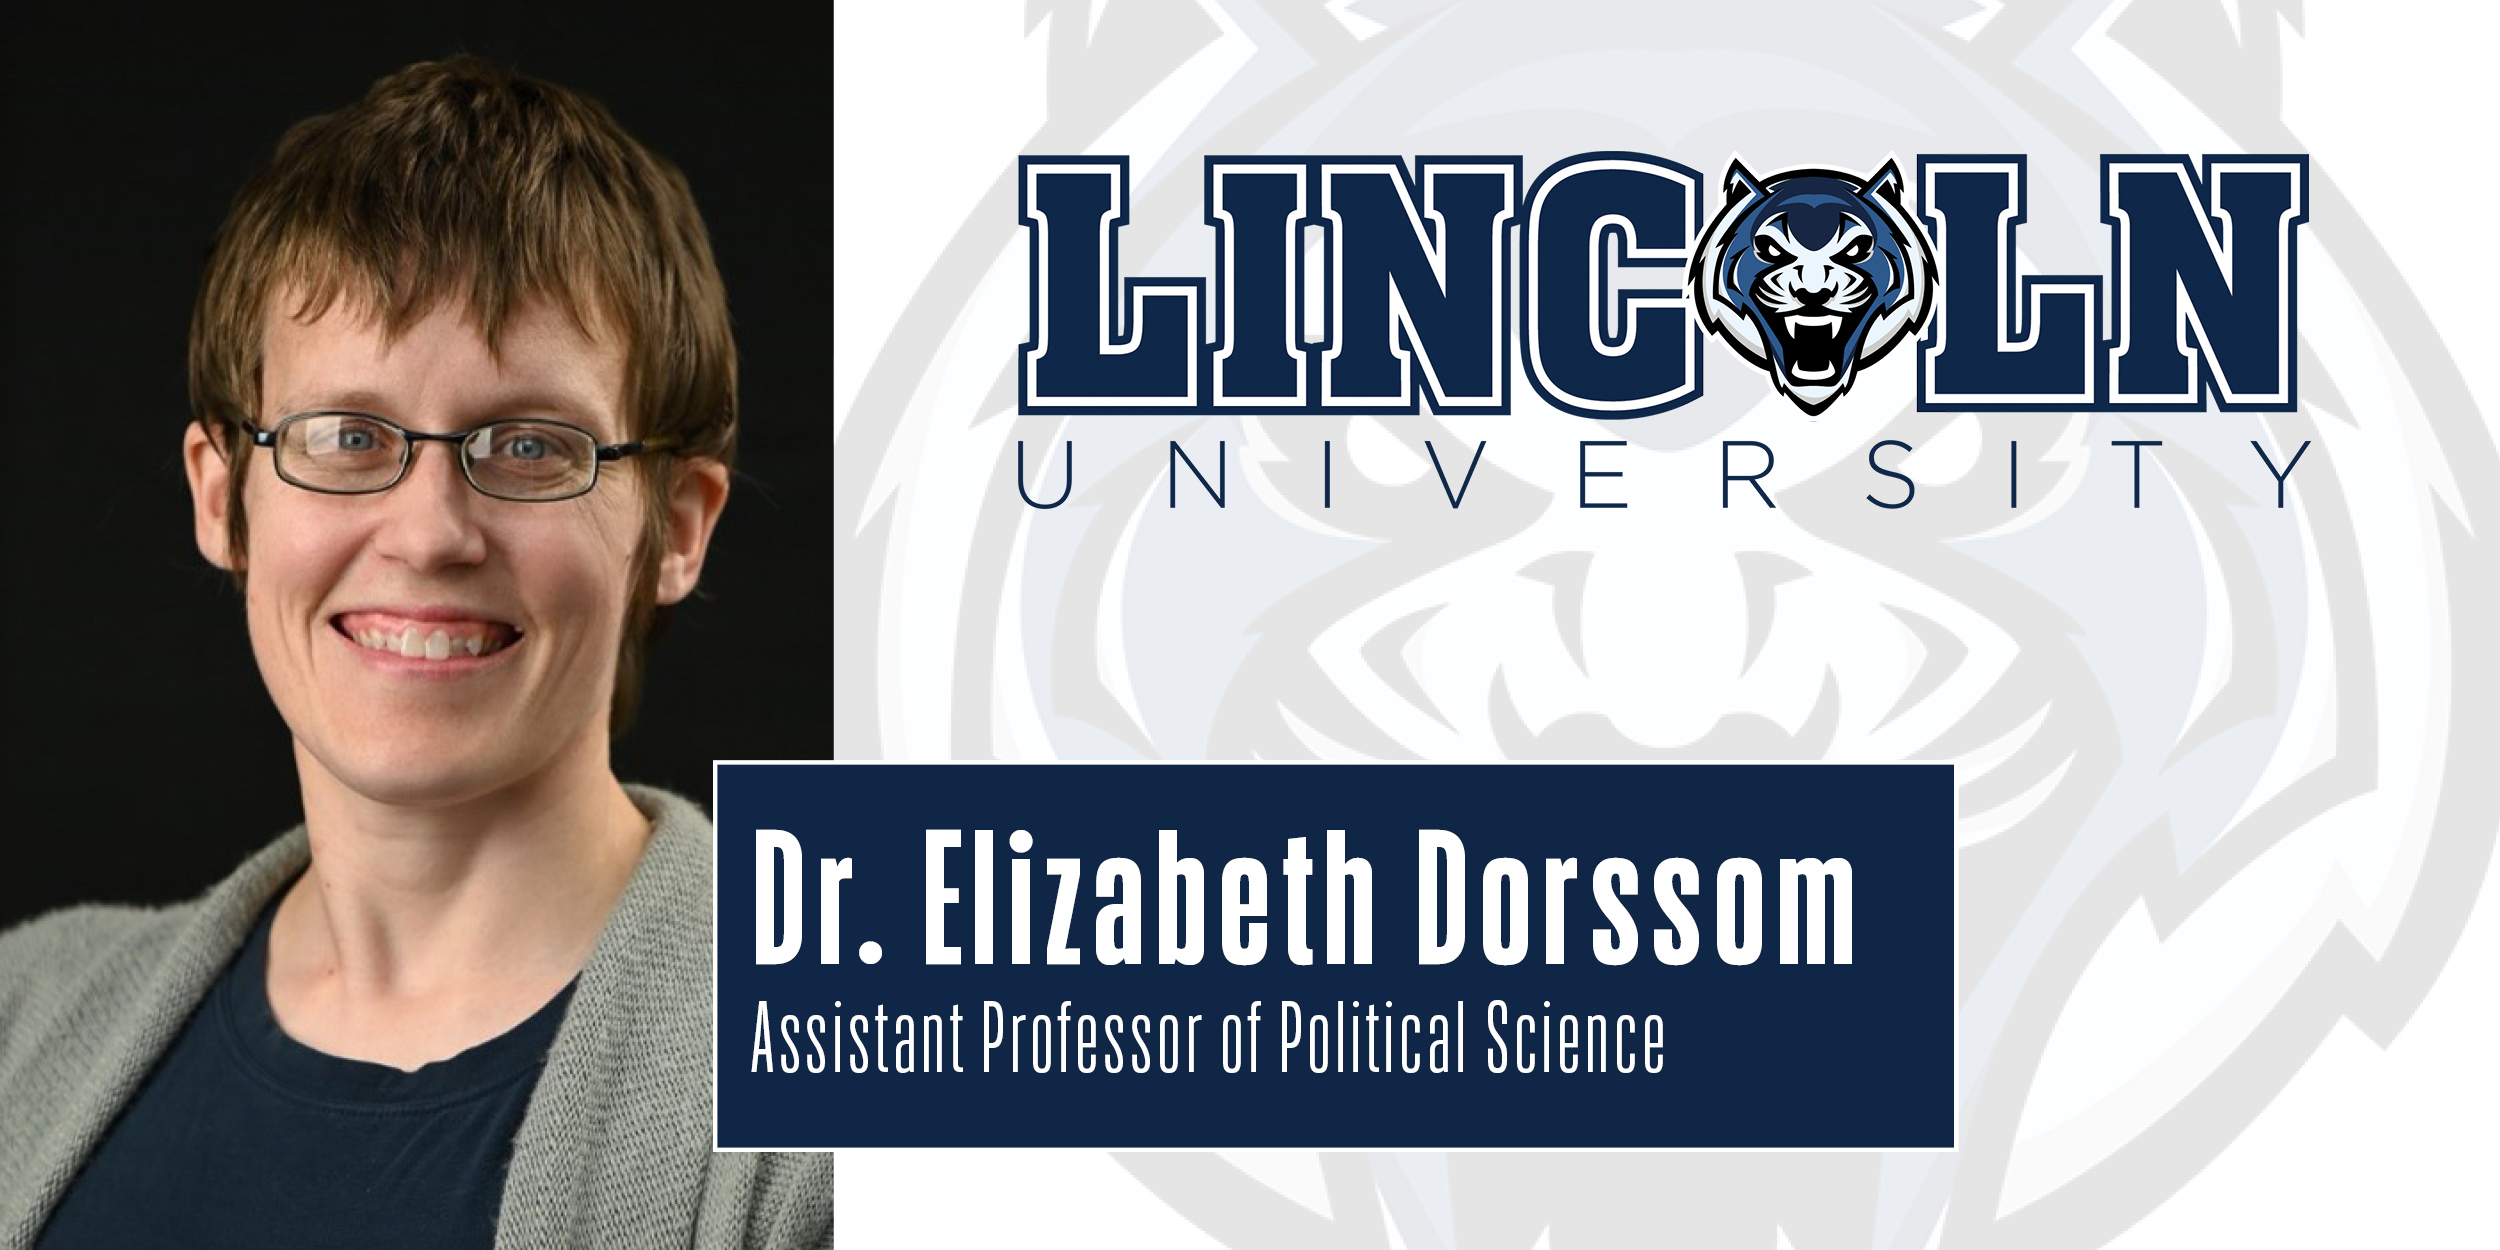 Dr. Elizabeth Dorssom, assistant professor of political science at Lincoln University, research focuses on the impact of resources on politics and policy.